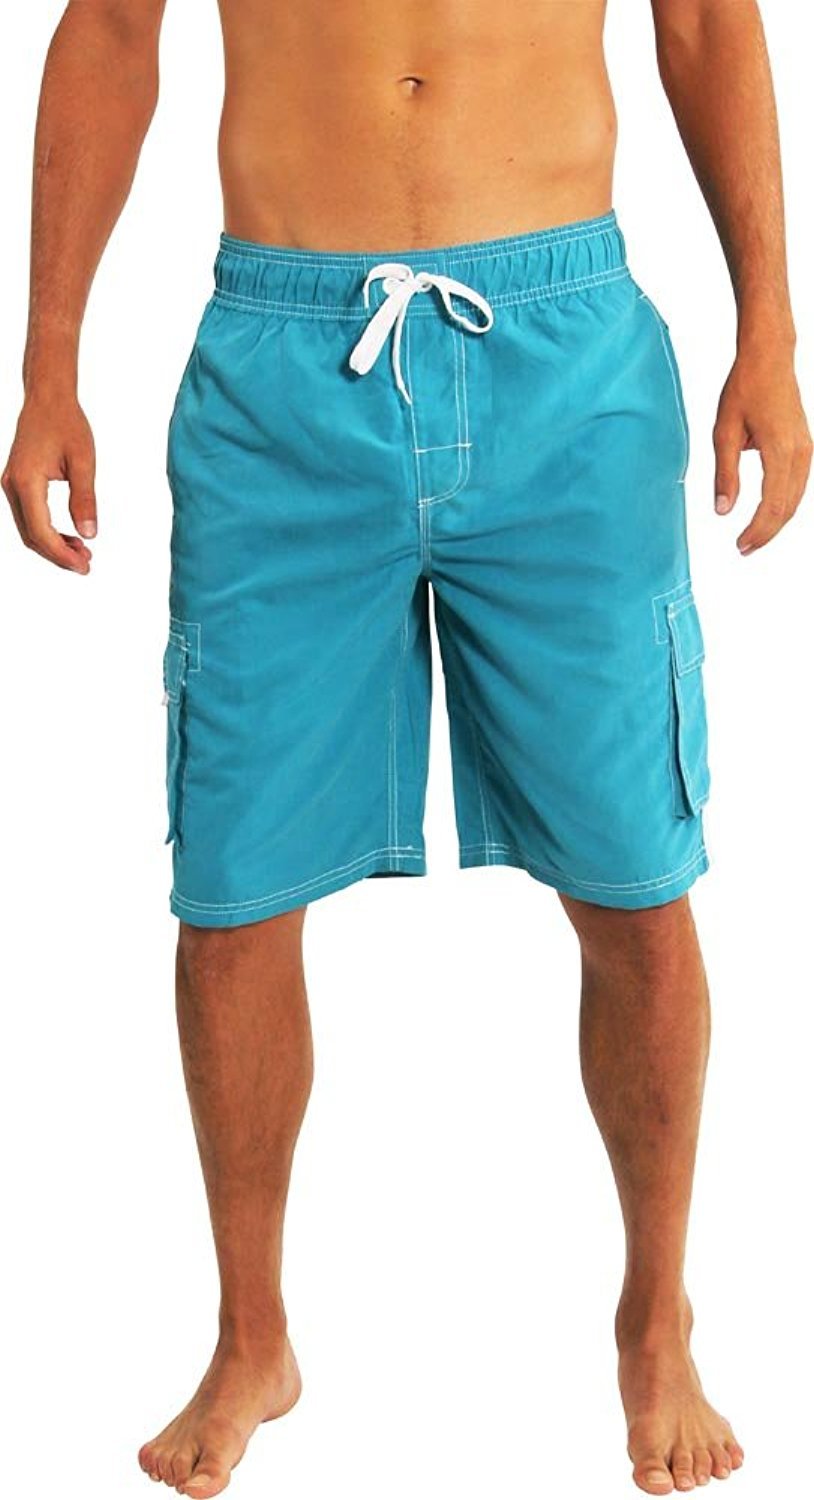 BREND NEW RED SWIM TRUNKS HURRY TO BUY